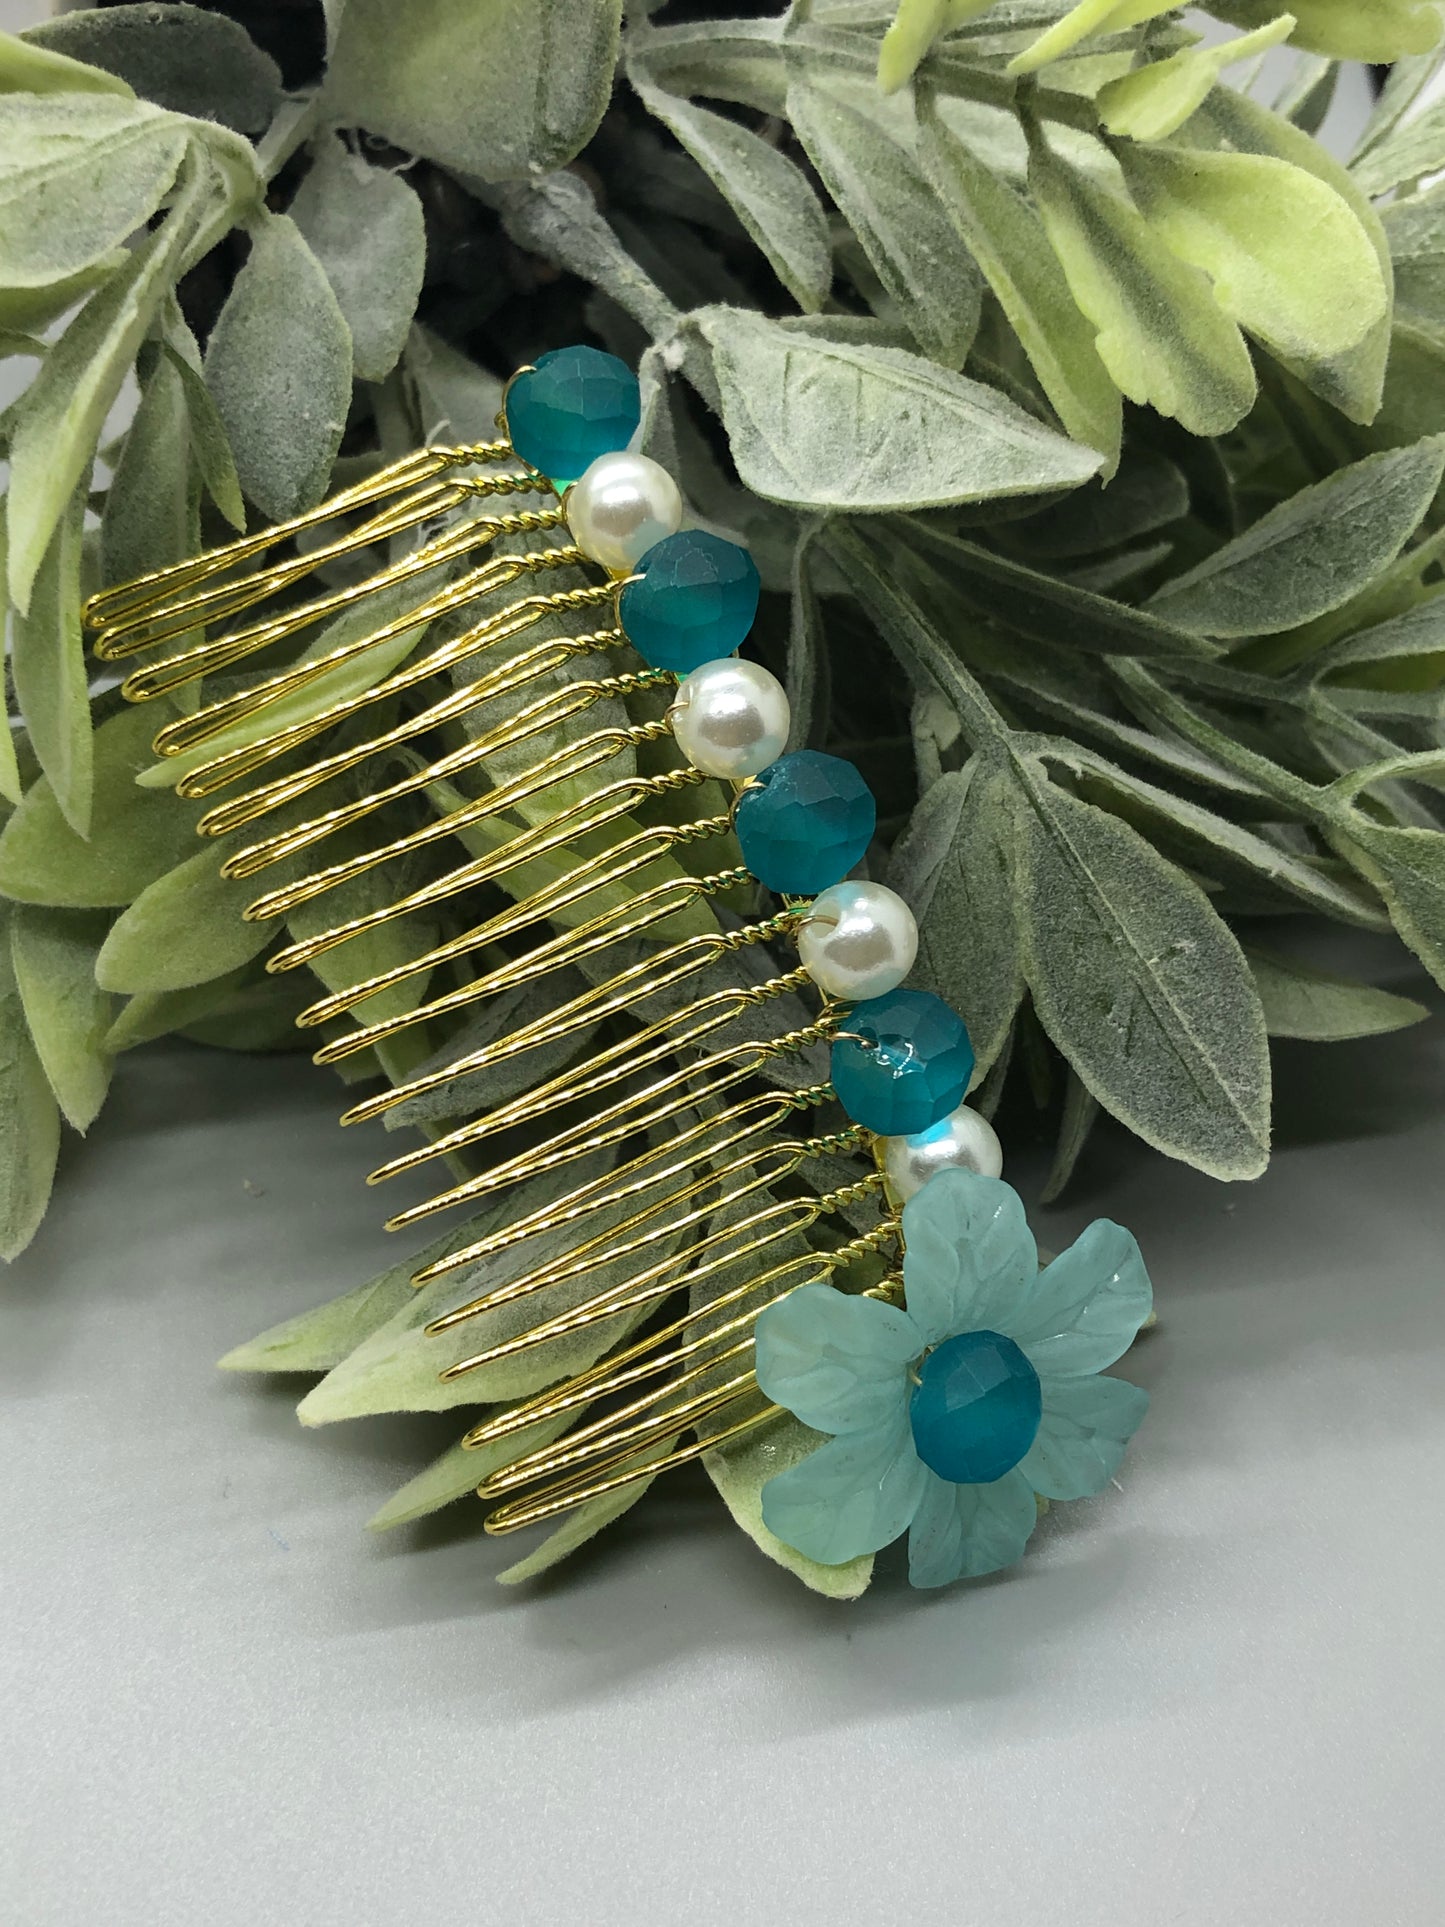 Teal Acrylic Flower Teal White Beads 3.5' Metal Side Comb Retro Vintage Style 1 pc